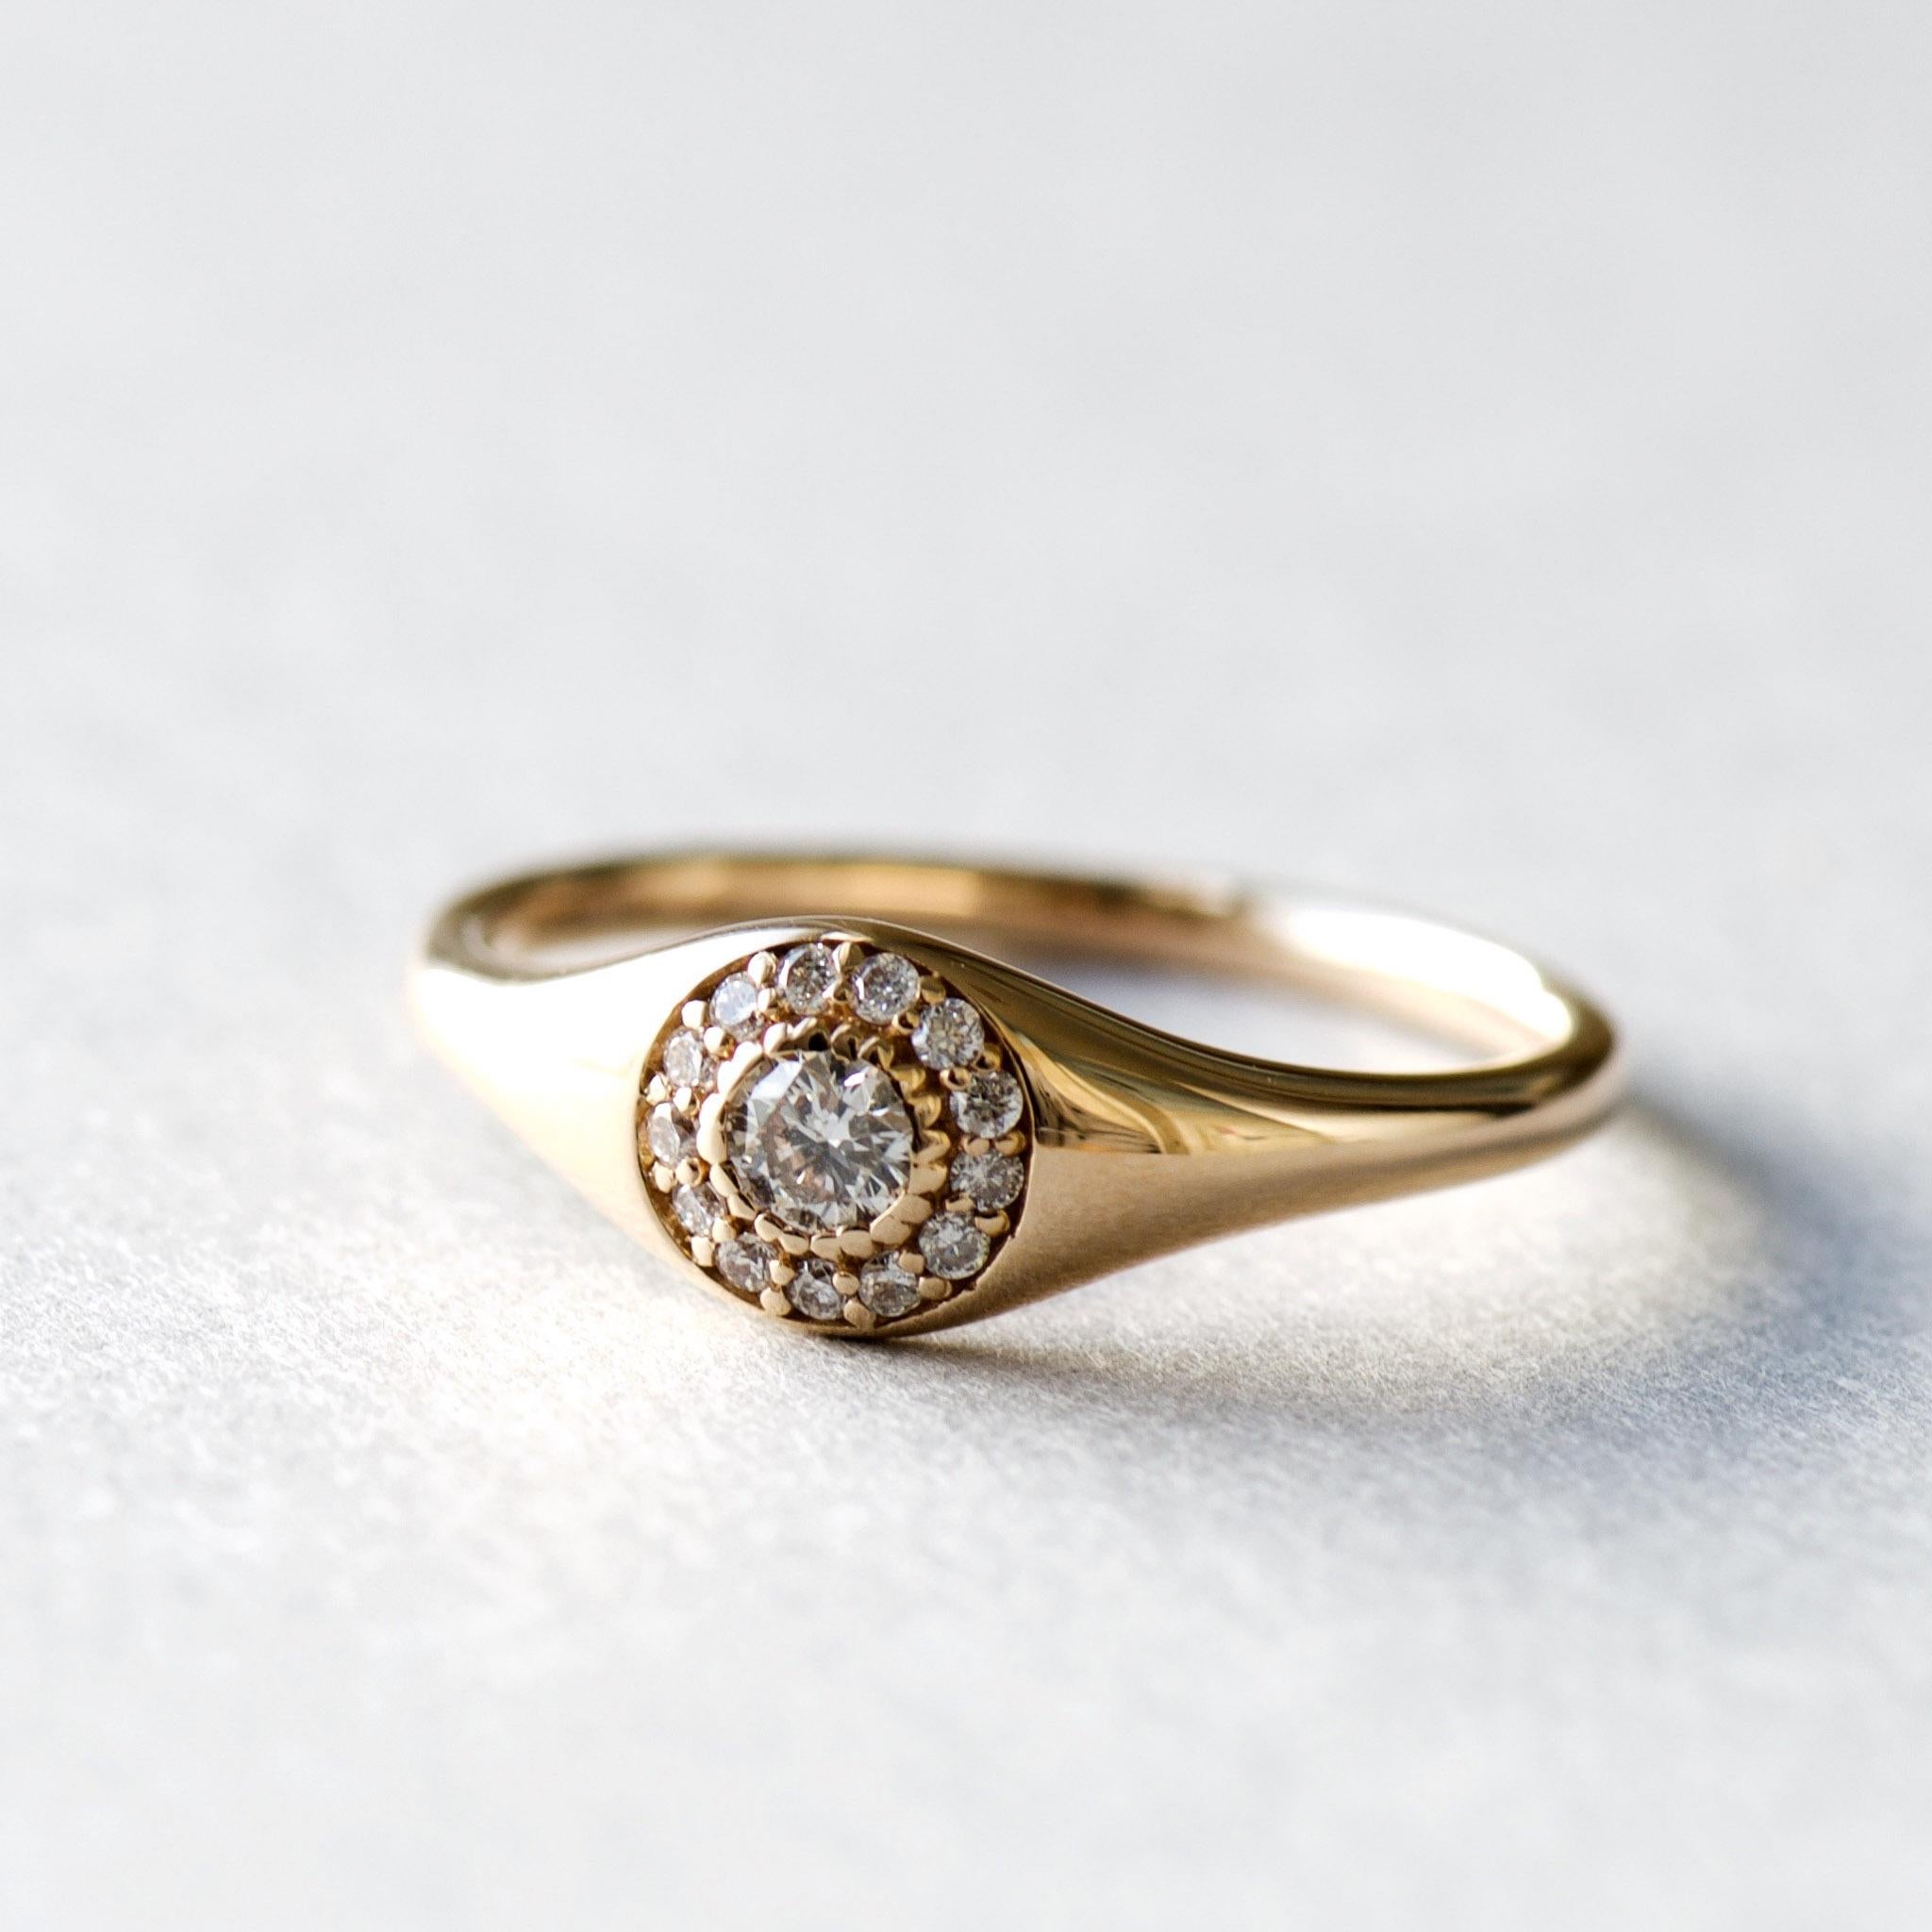 Eye catching sleek signet ring with 3mm diamond set on 18k rose gold.
AU750 fully hallmarked
Main stone: 3mm Diamond: 0.120ct
13 melee diamonds: 0.076/13ct
Total ring weight: 2.889g
Total gold weight:2.85g
Clarity: SI
Length: 6mm face with 1.76mm